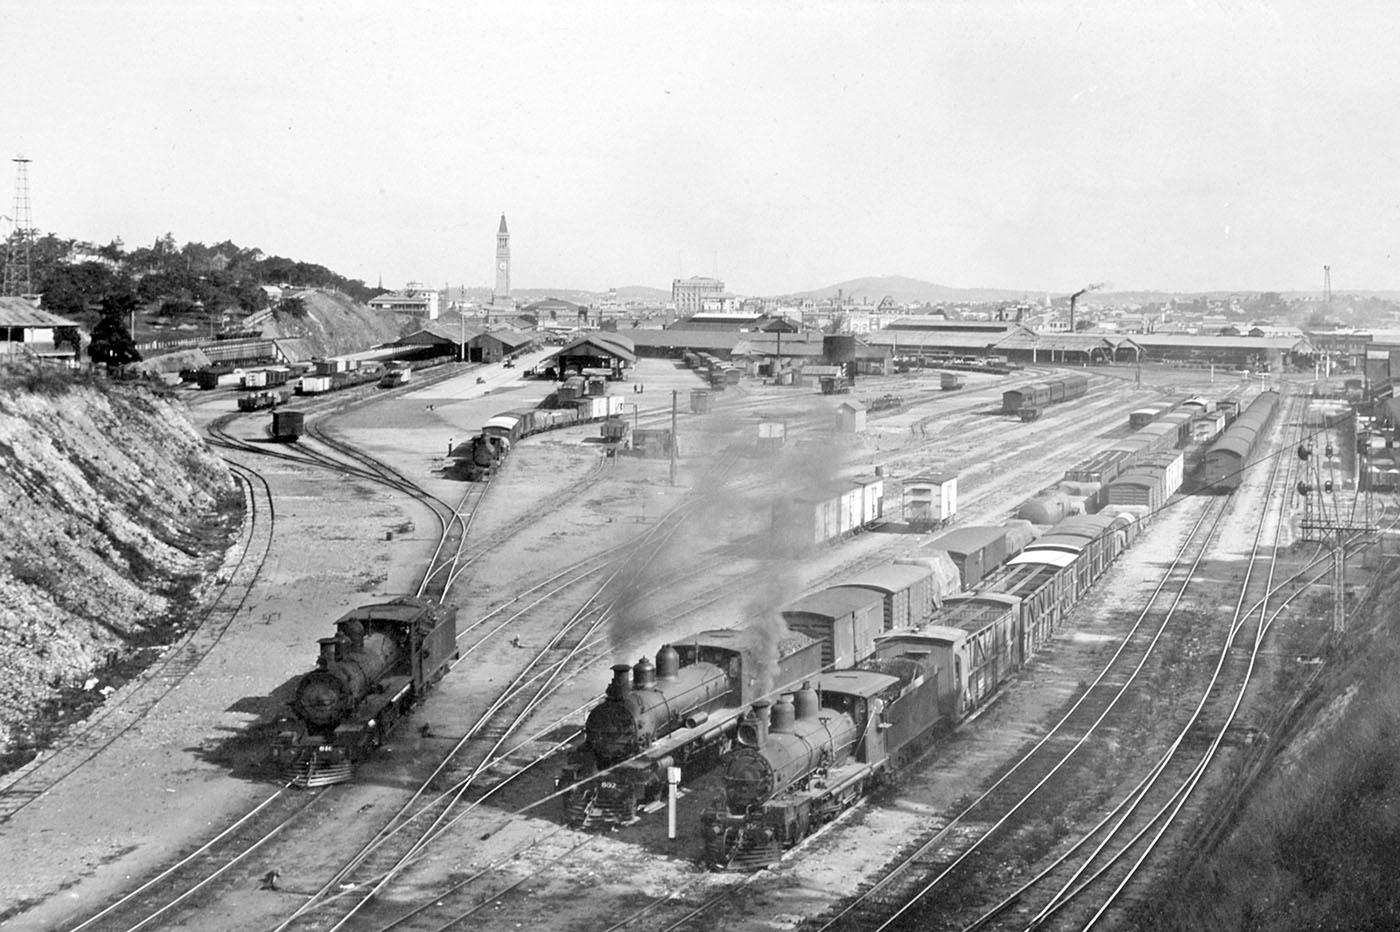 Roma Street Railway Station with steam trains in foreground, c 1936